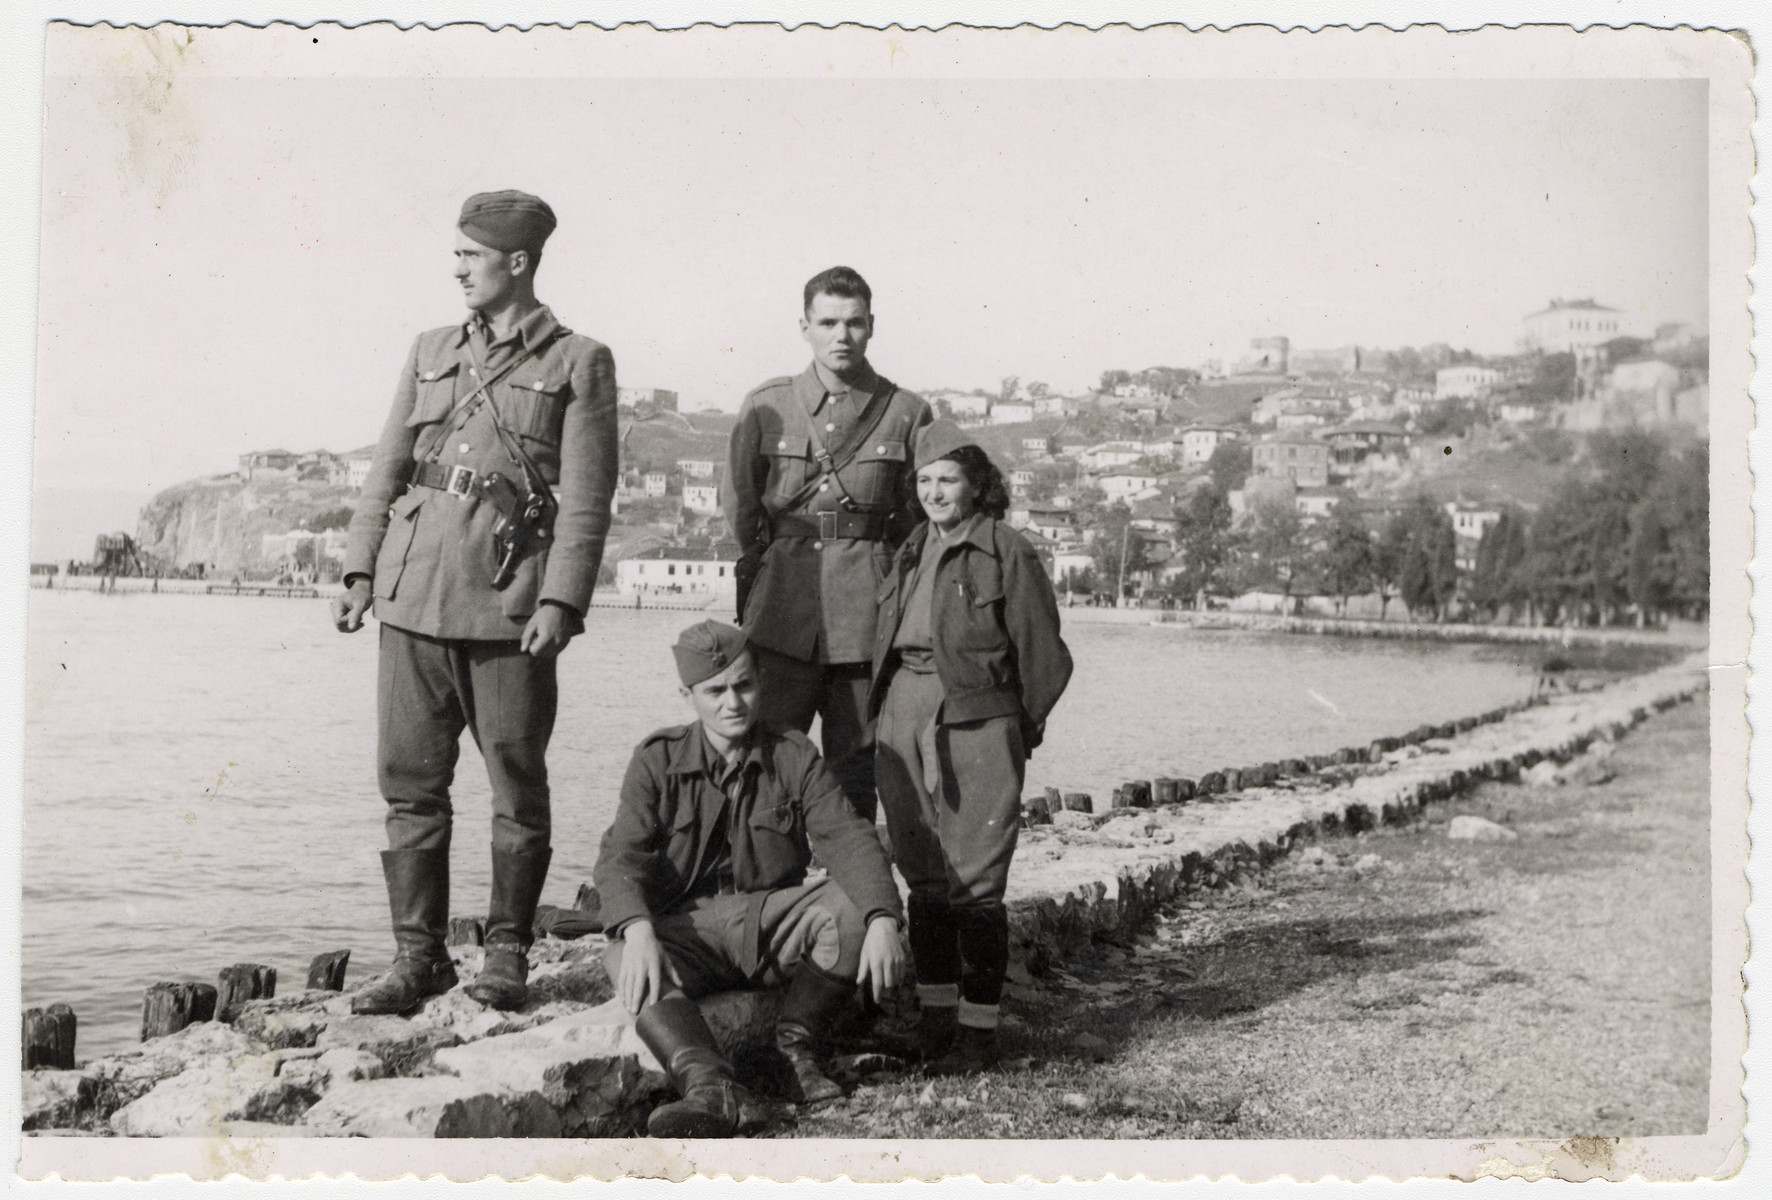 Four resistance fighters on the banks of the Lake Ohrid, shortly after the town's liberation.

Among those pictured are (left to right) unidentified officers (standing and seated), Chede Filipovski, and Commissar Jamila Kolonomos.